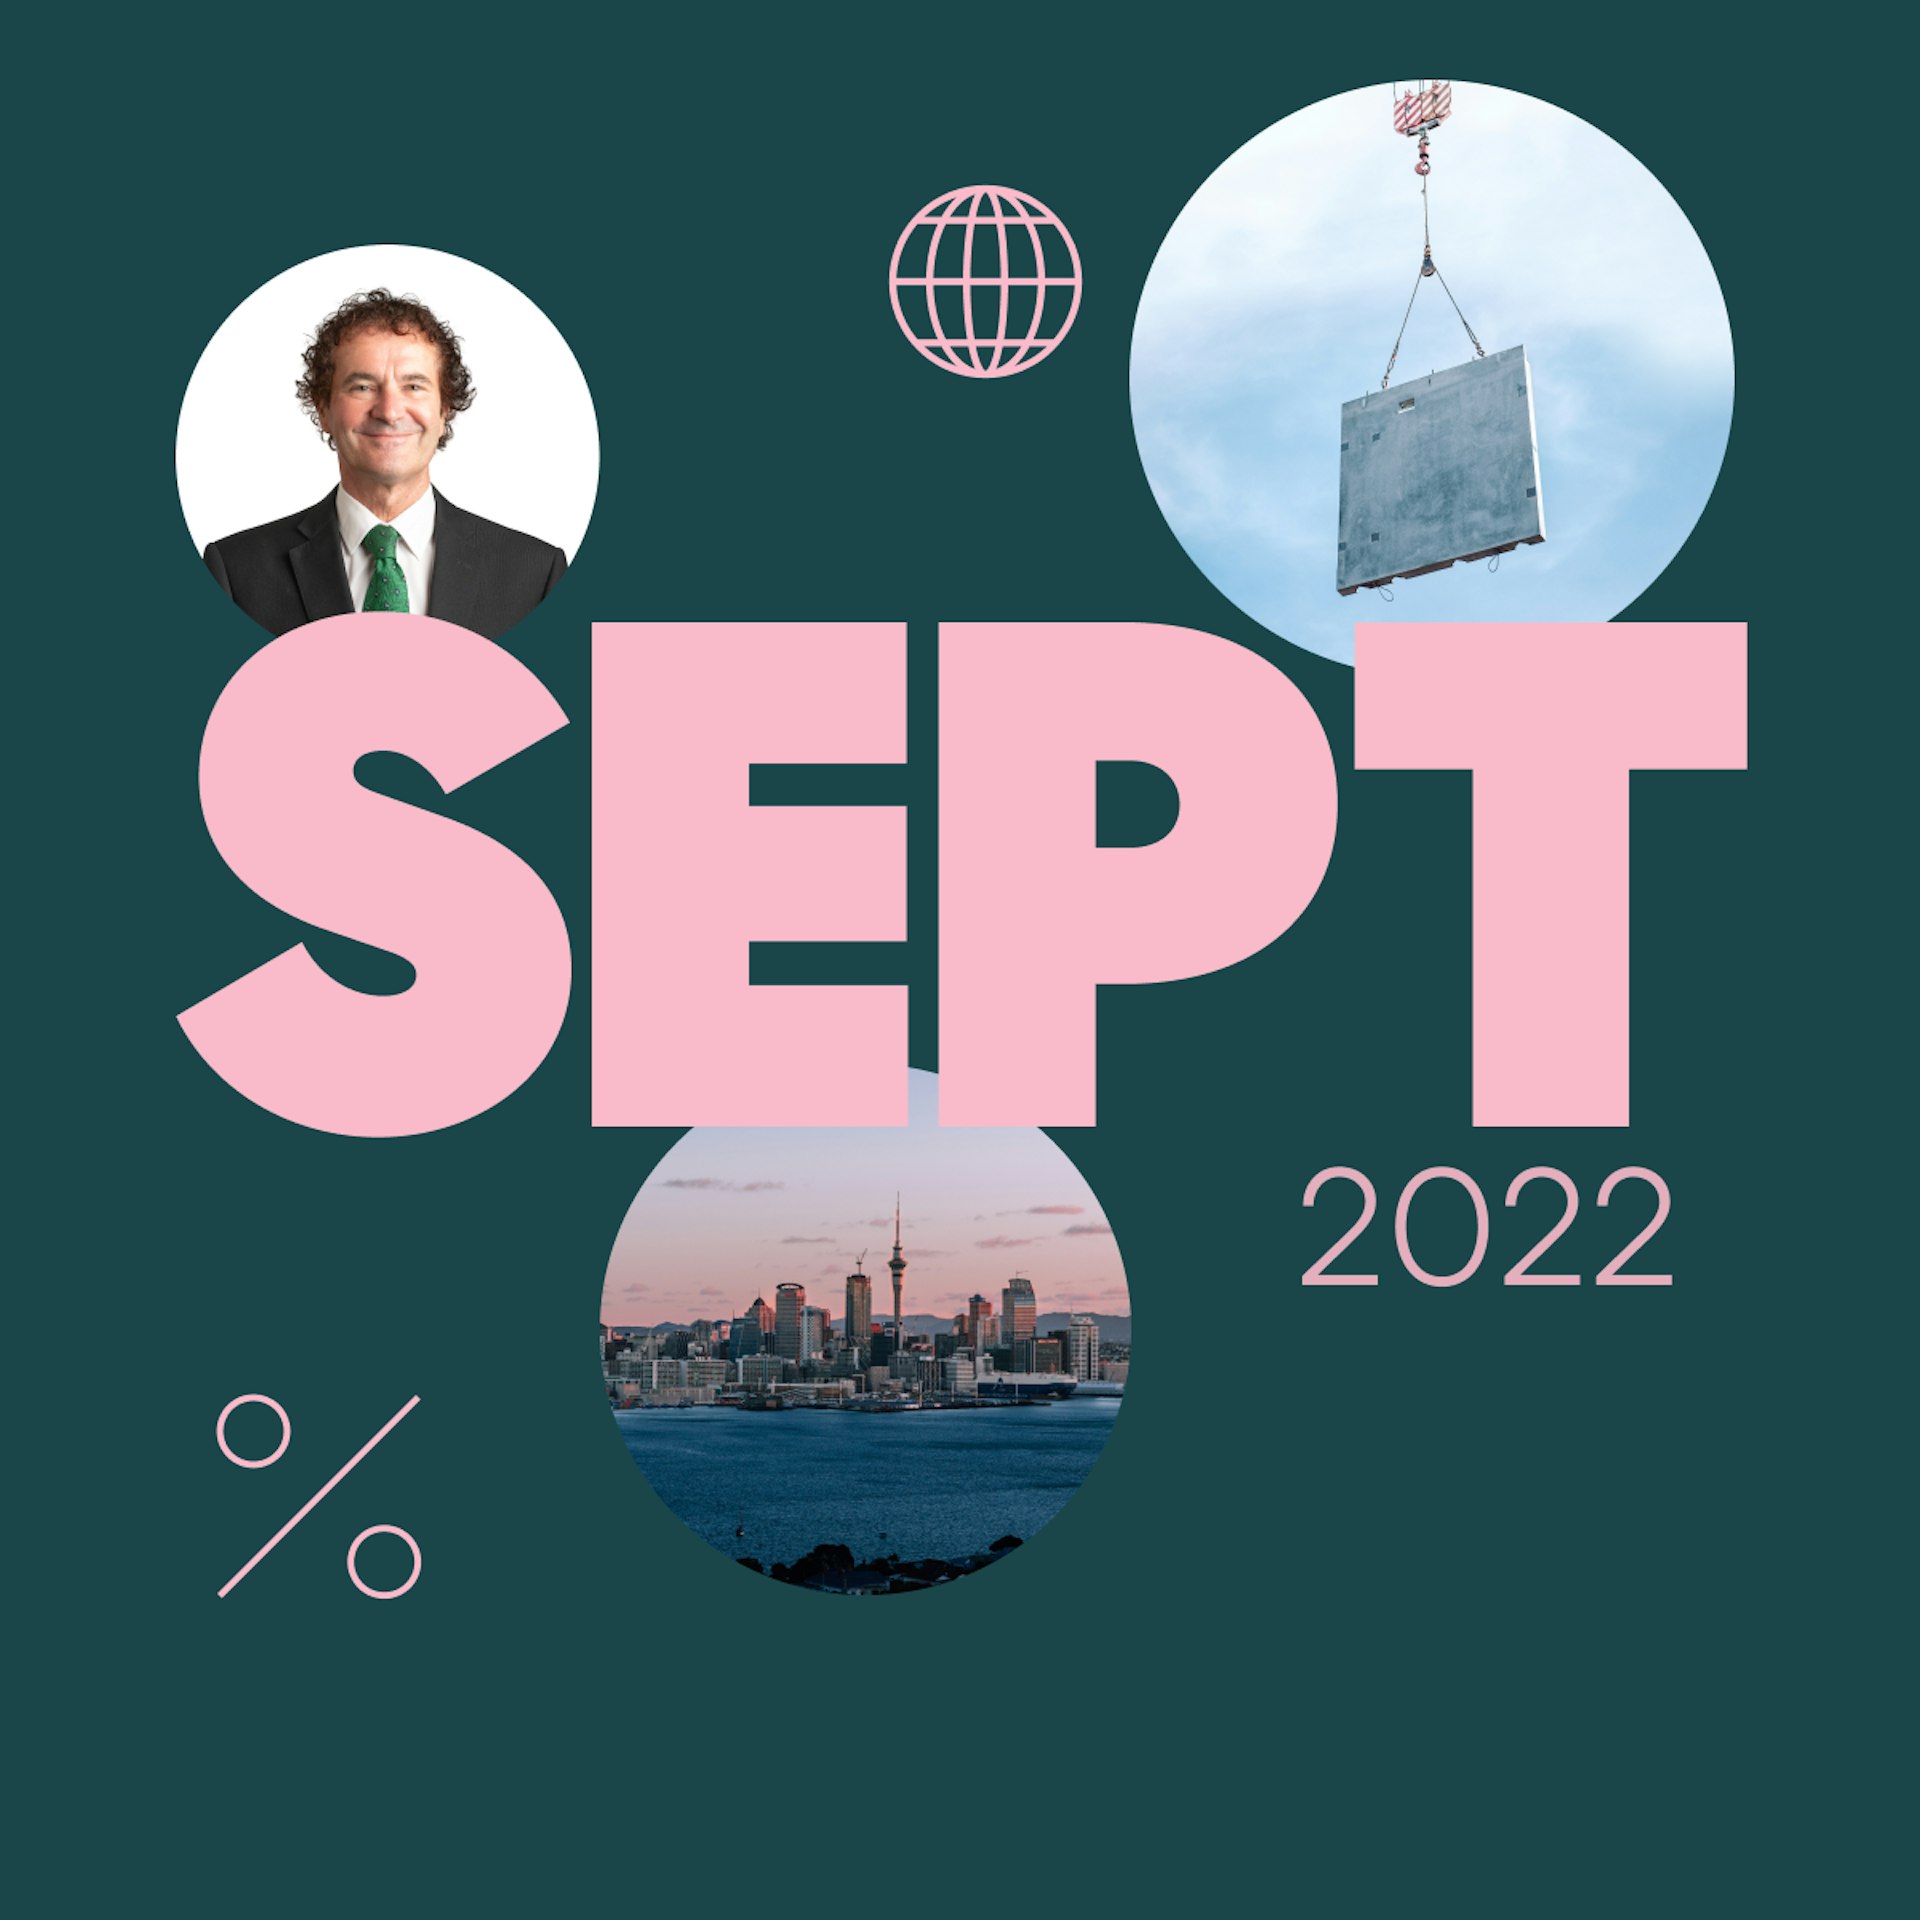 Header image for Investing Insights with Tony Alexander. The word 'Sept' is in large pink text in the middle of the image, surrounded by a picture of Tony smiling, a crane lifting a concrete block, and Auckland city skyline. 